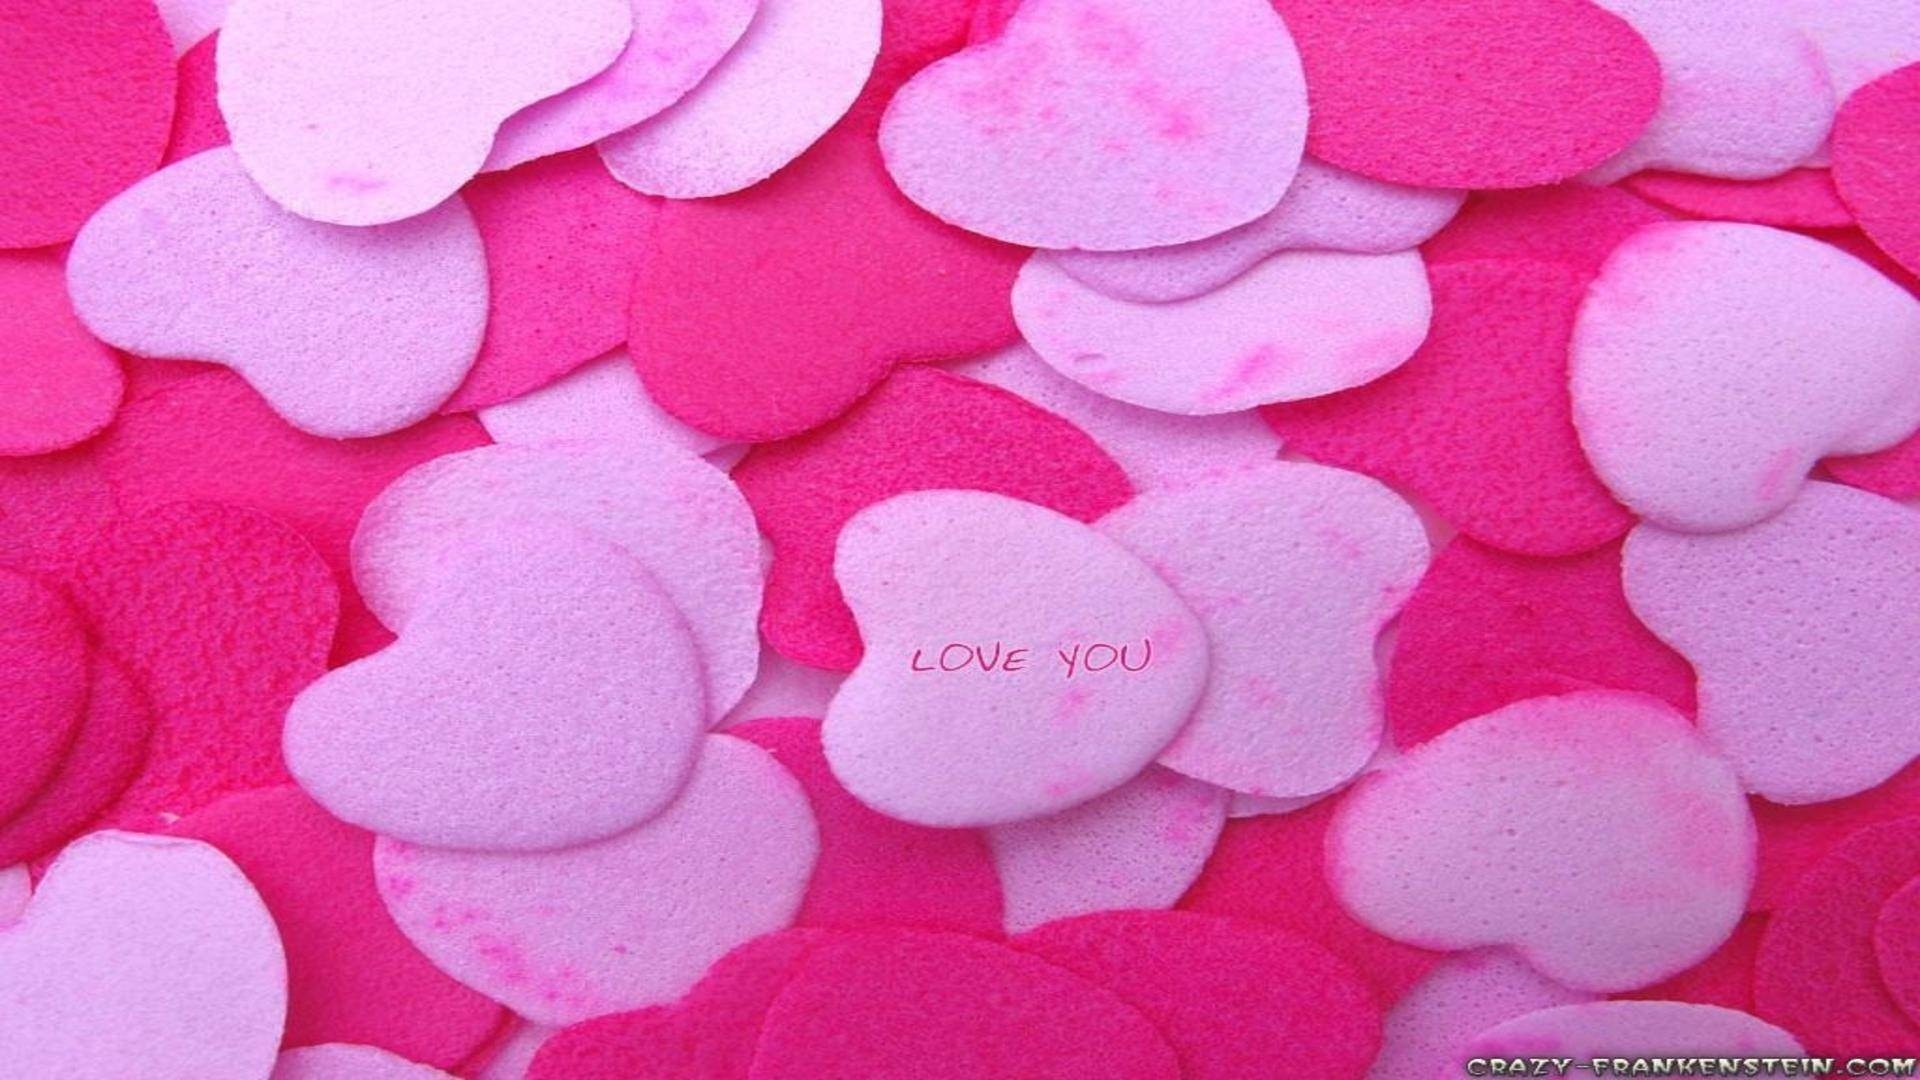 Wallpapers Backgrounds – Bunch pink red hearts love wallpapers desktop background